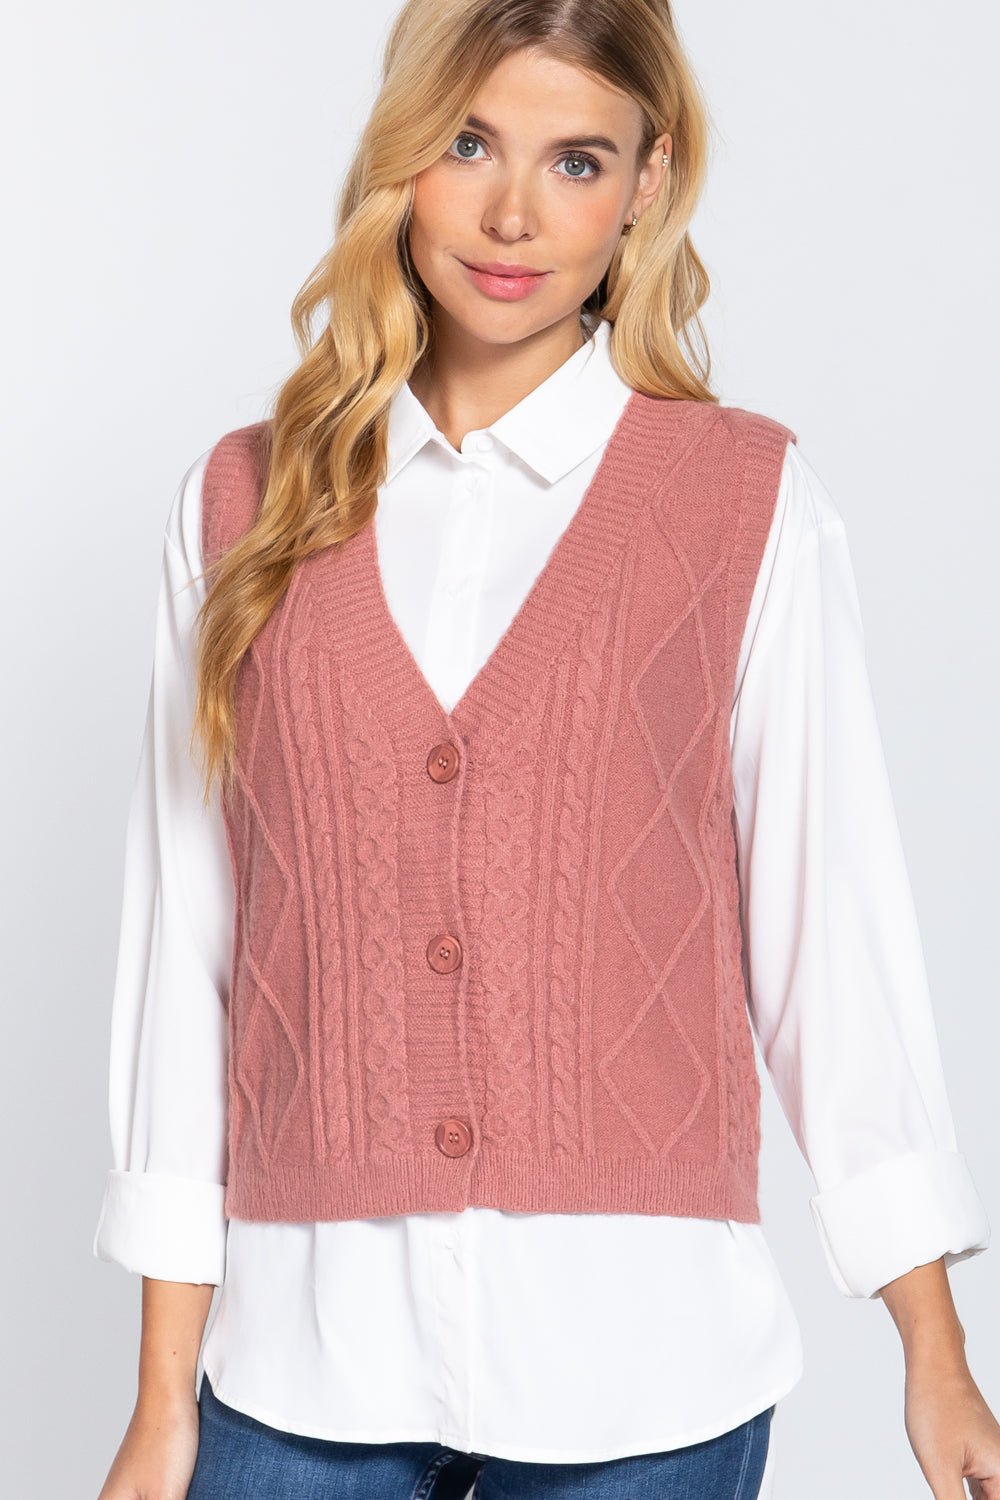 Our Best 44% Acrylic 30% Nylon 20% Polyester V-neck Cable Knit Sweater Vest Cardigan (Pink)